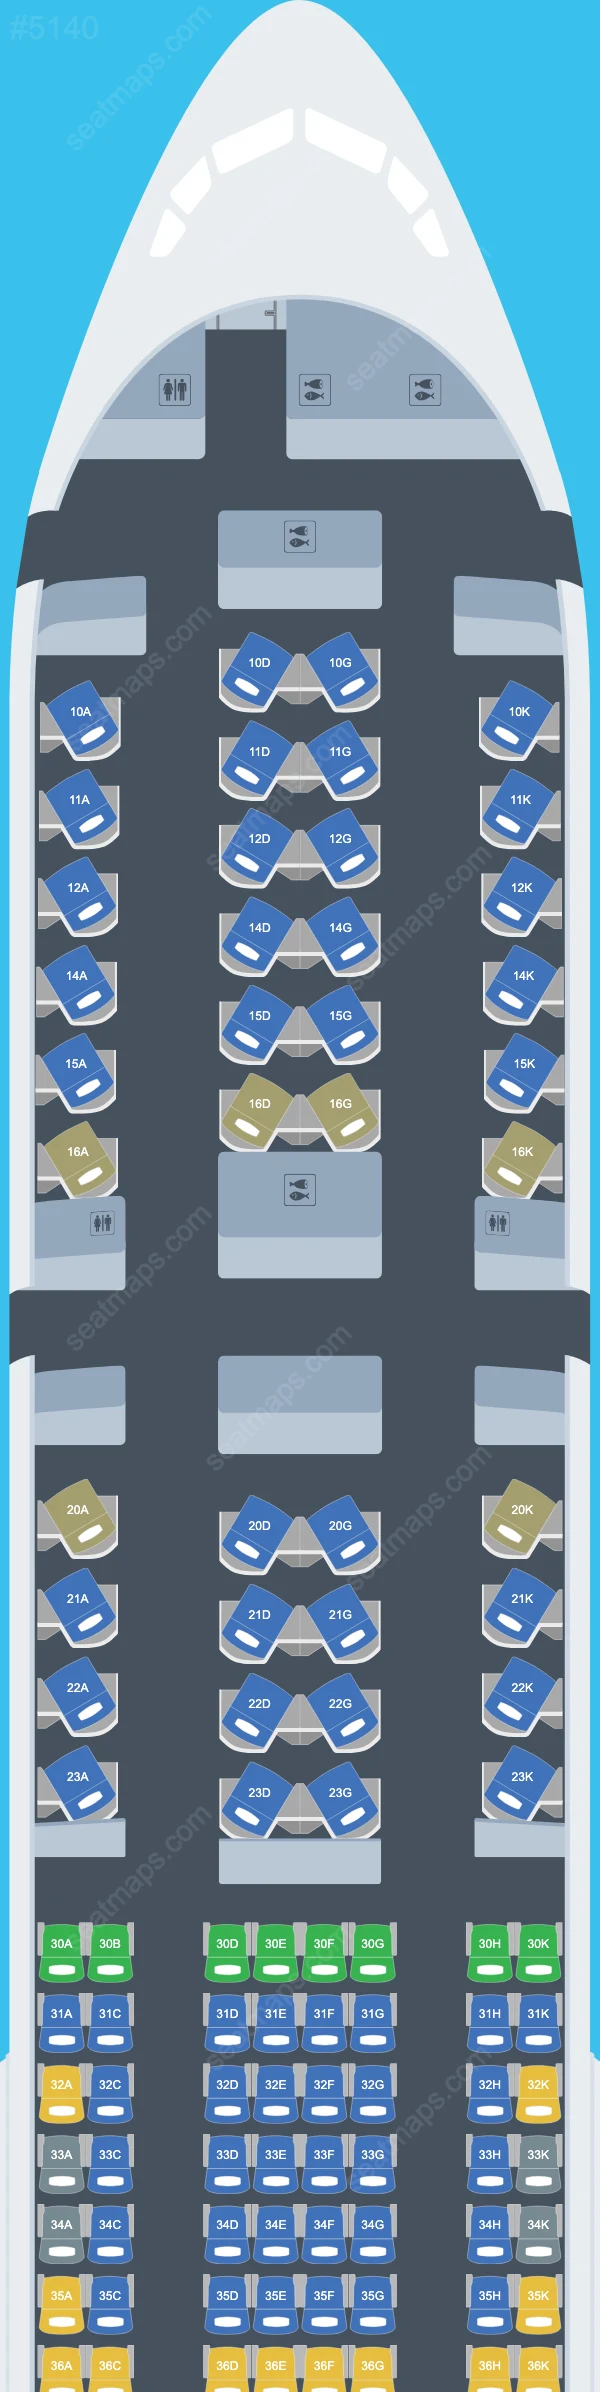 China Airlines Boeing 777-300 ER seatmap preview